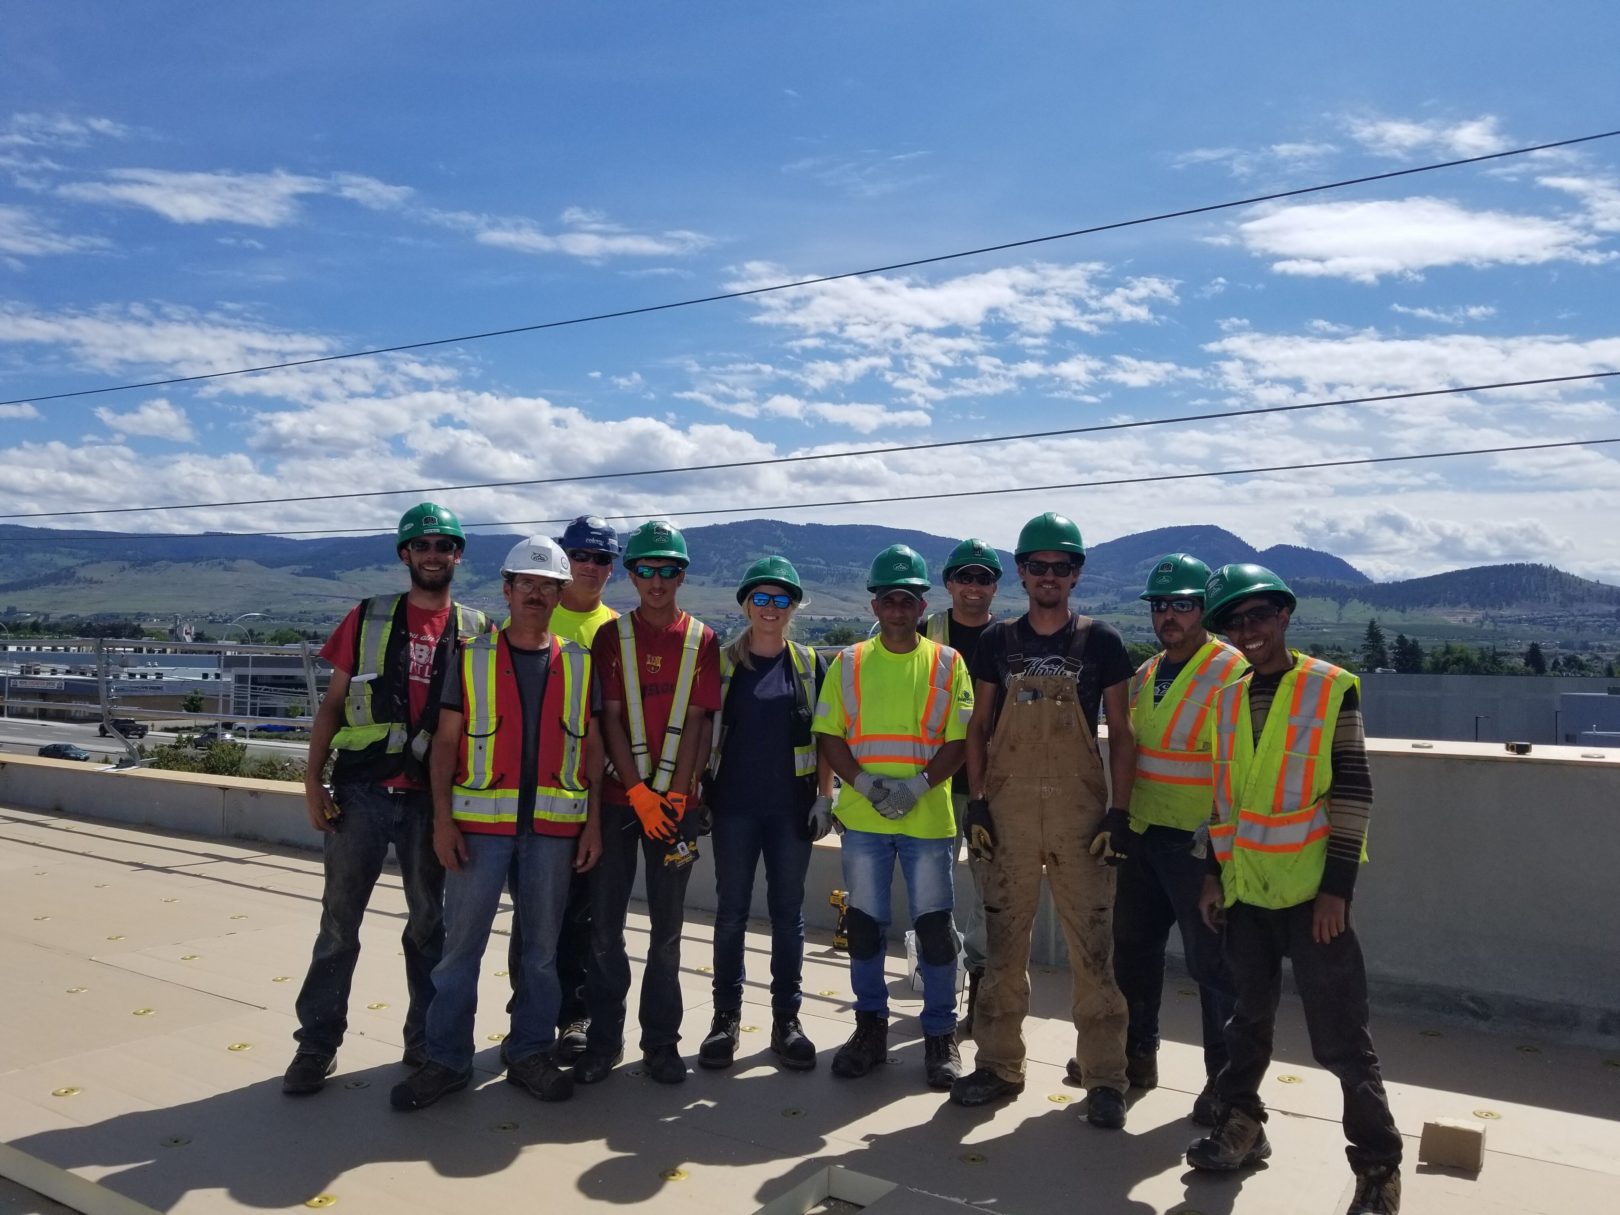 Flynn crew photo on top of roof